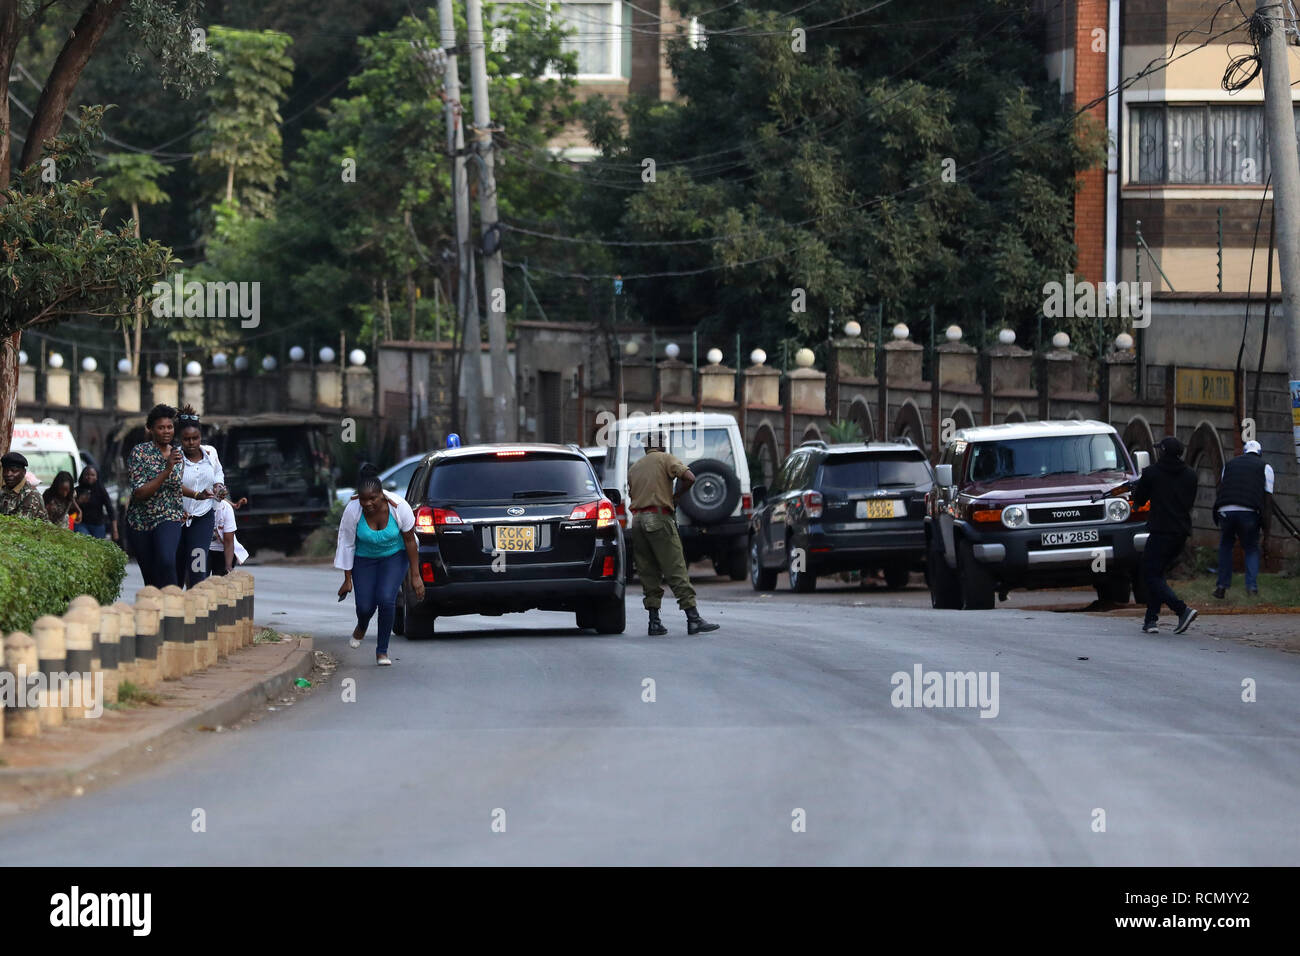 Nairobi, Kenya. 15th Jan, 2019. People are seen near the site of an attack at an upmarket hotel and office complex in Nairobi, Kenya, on Jan. 15, 2019. At least three people have been confirmed dead and several others injured following an attack at an upmarket hotel and office complex in Nairobi on Tuesday, police said. Credit: Wang Teng/Xinhua/Alamy Live News Stock Photo